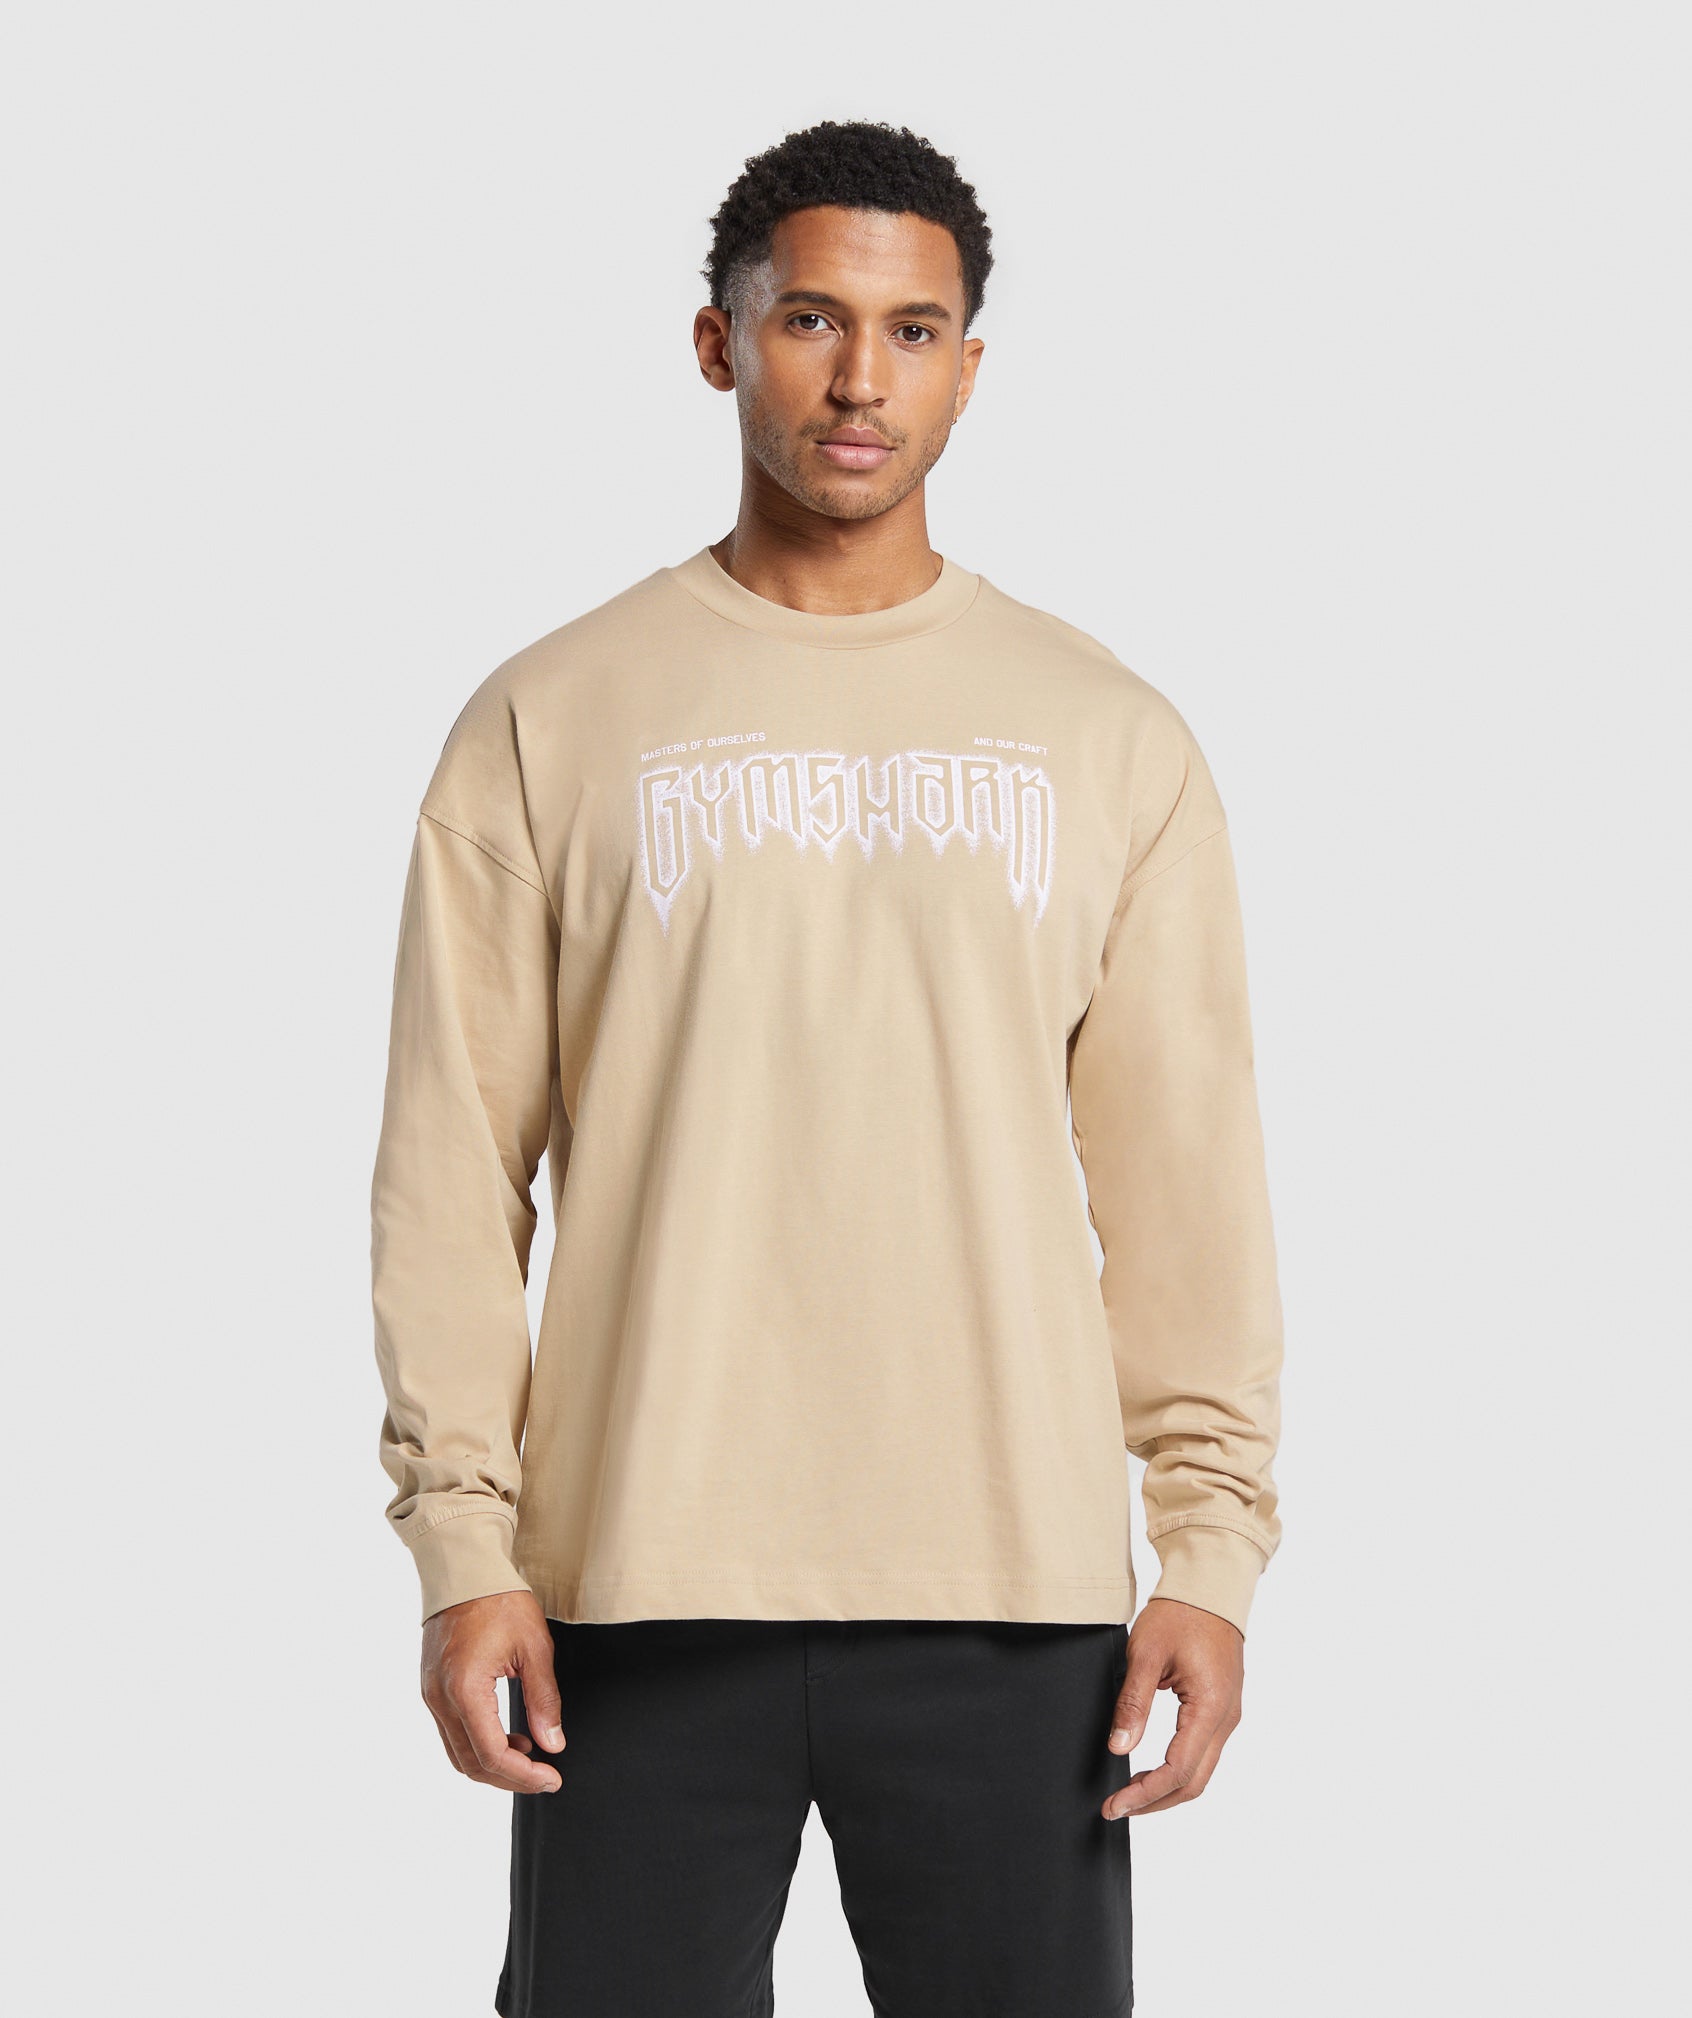 Masters of Our Craft Long Sleeve T-Shirt in Vanilla Beige